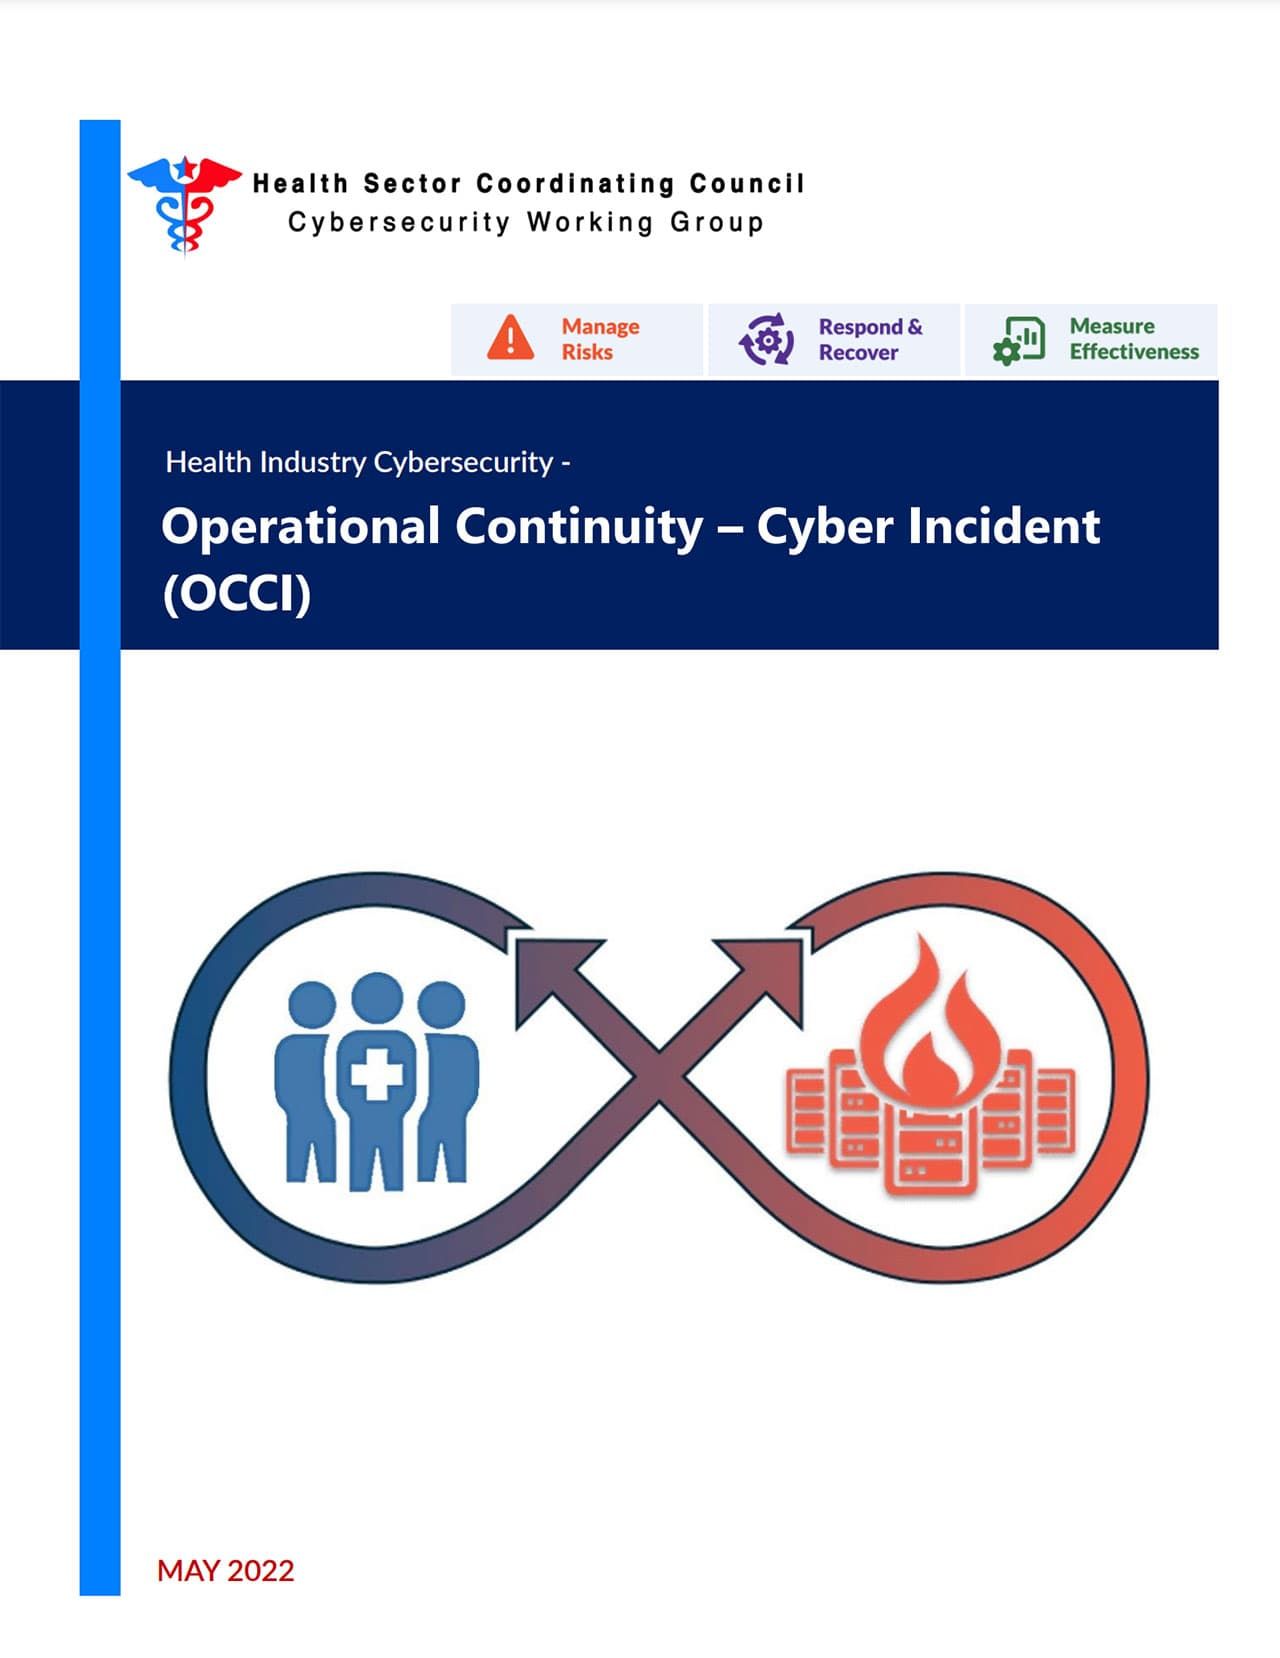 Operational Continuity – Cyber Incident (OCCI)